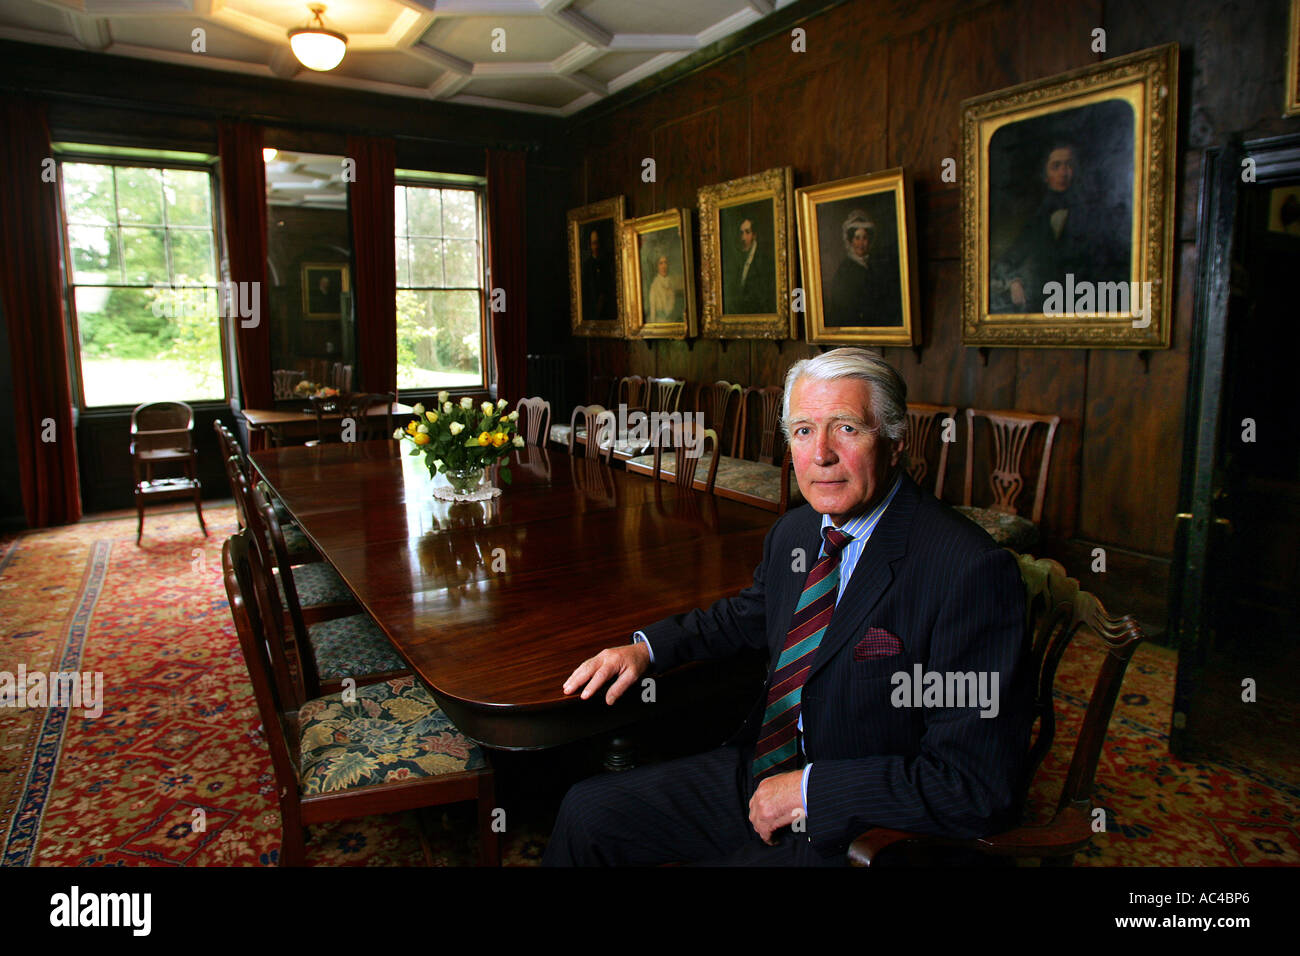 Lord William Coleridge in the Fairfax Cromwell Room at The Chanter's House, Ottery St Mary in Devon UK Stock Photo